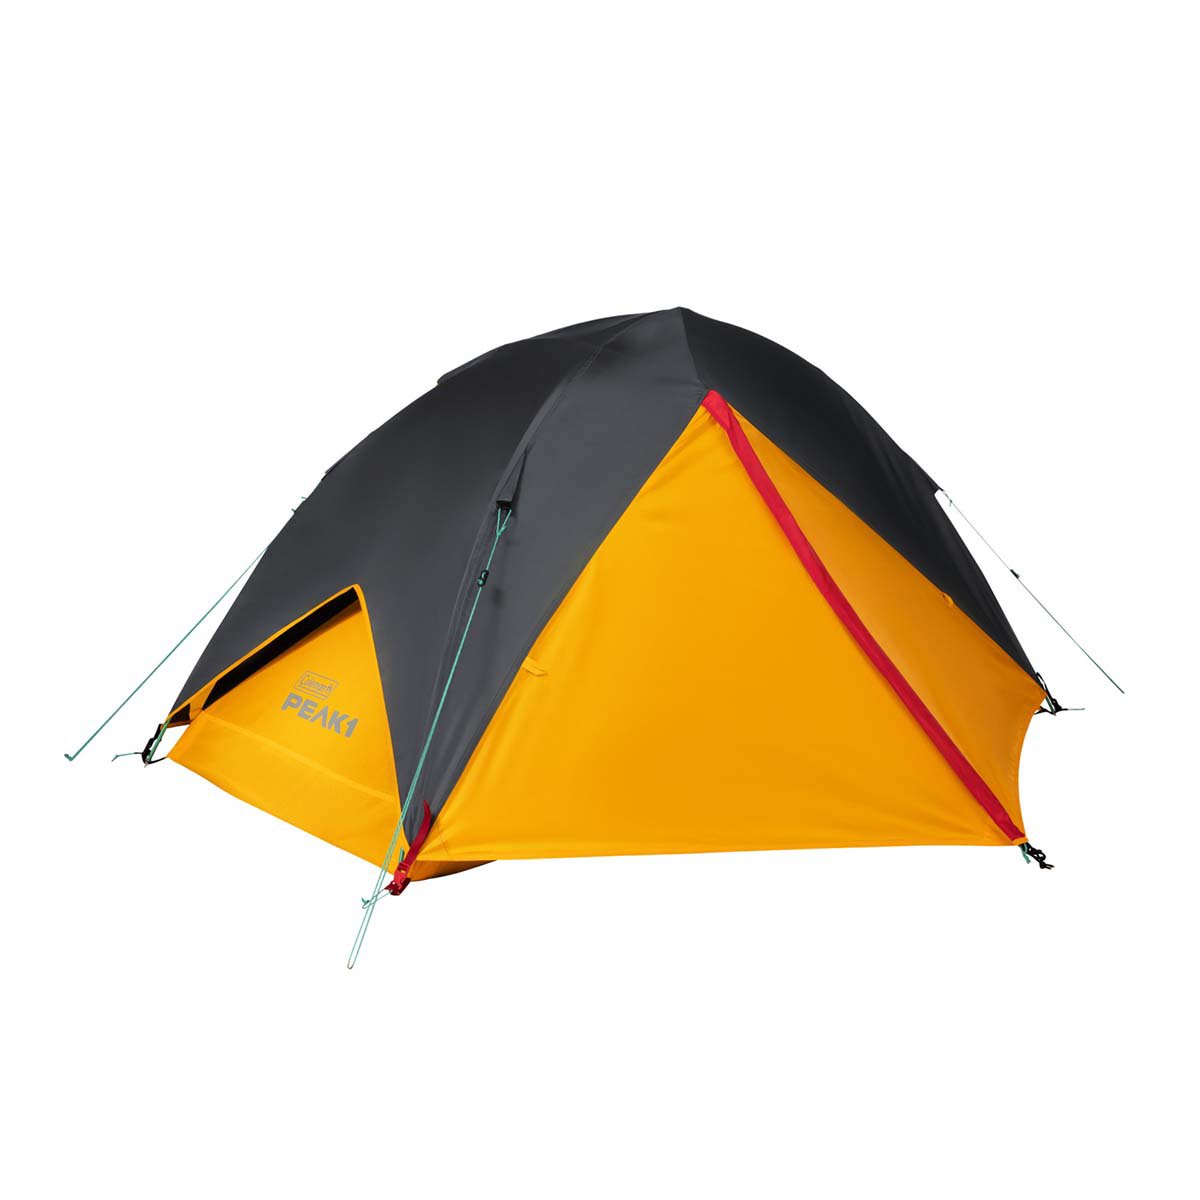 Backpacking Tent Full Fly 1-Person Lightweight Camping Hiking Travel  Waterproof